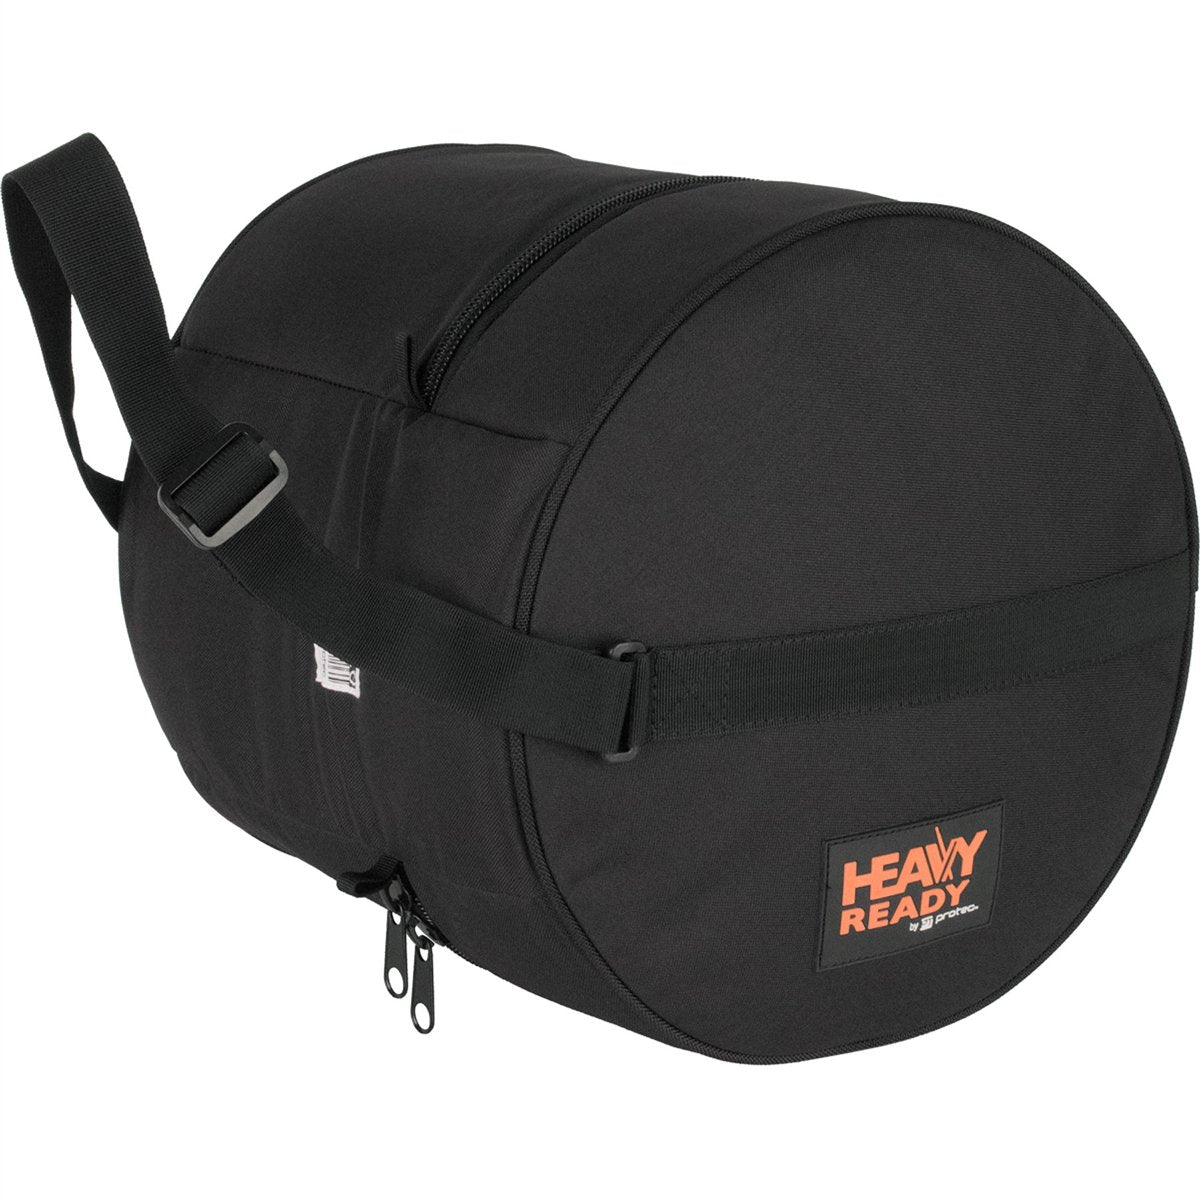 Protec - Padded Tom Bag 9â€³ X 10â€³ (Heavy Ready Series)-Percussion-Protec-Music Elements